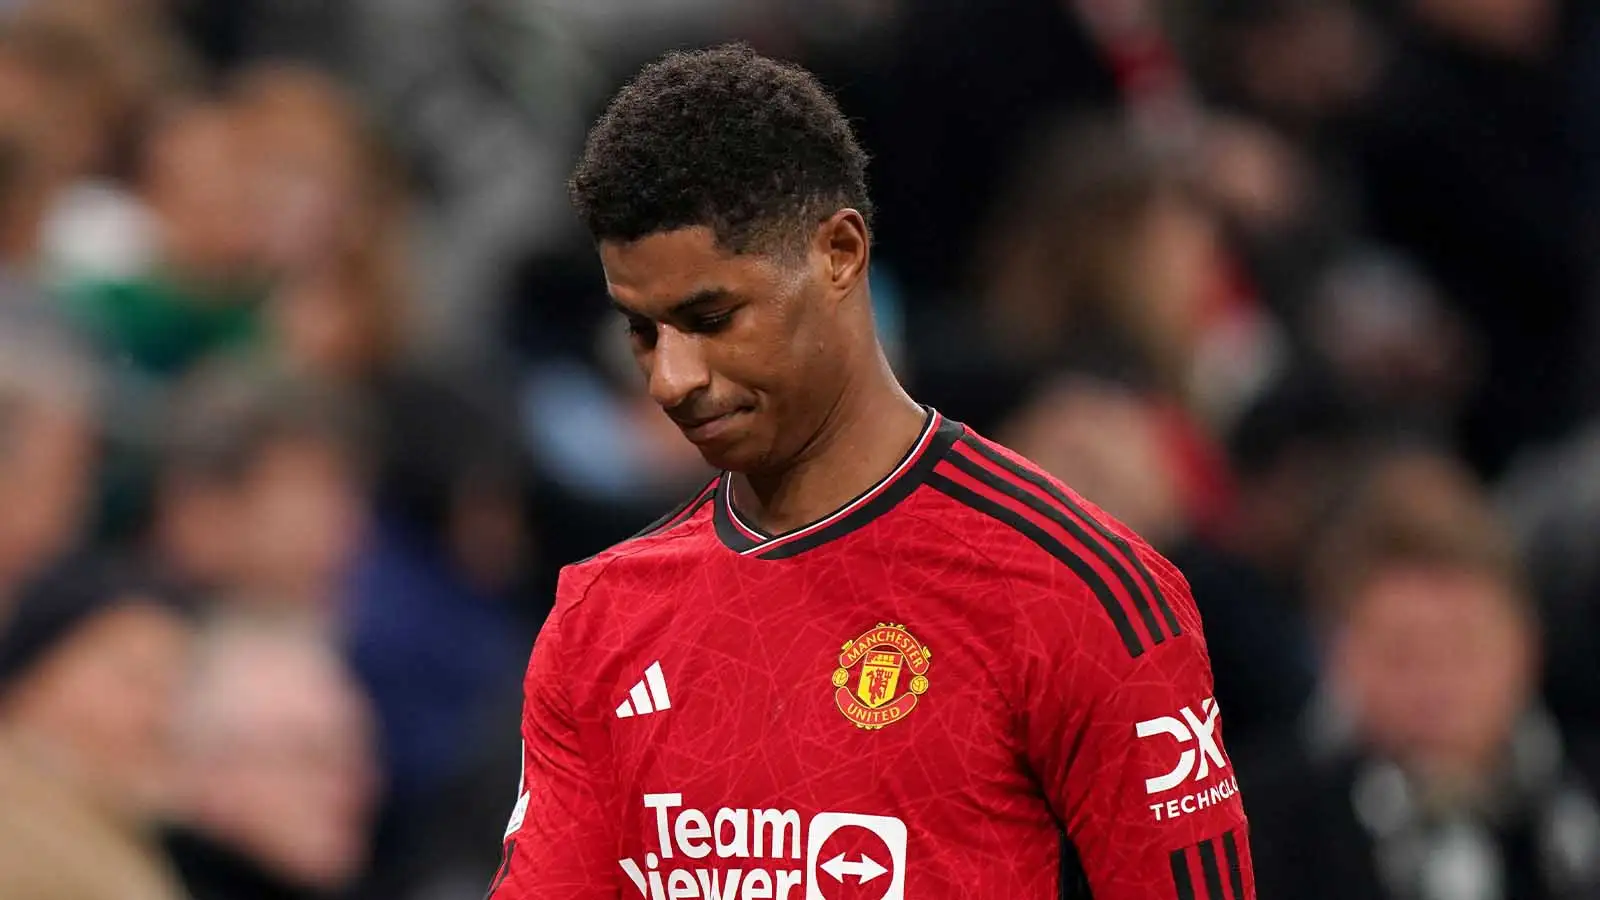 Man Utd legend claims Rashford ‘one of the worst’ off the ball in the Premier League